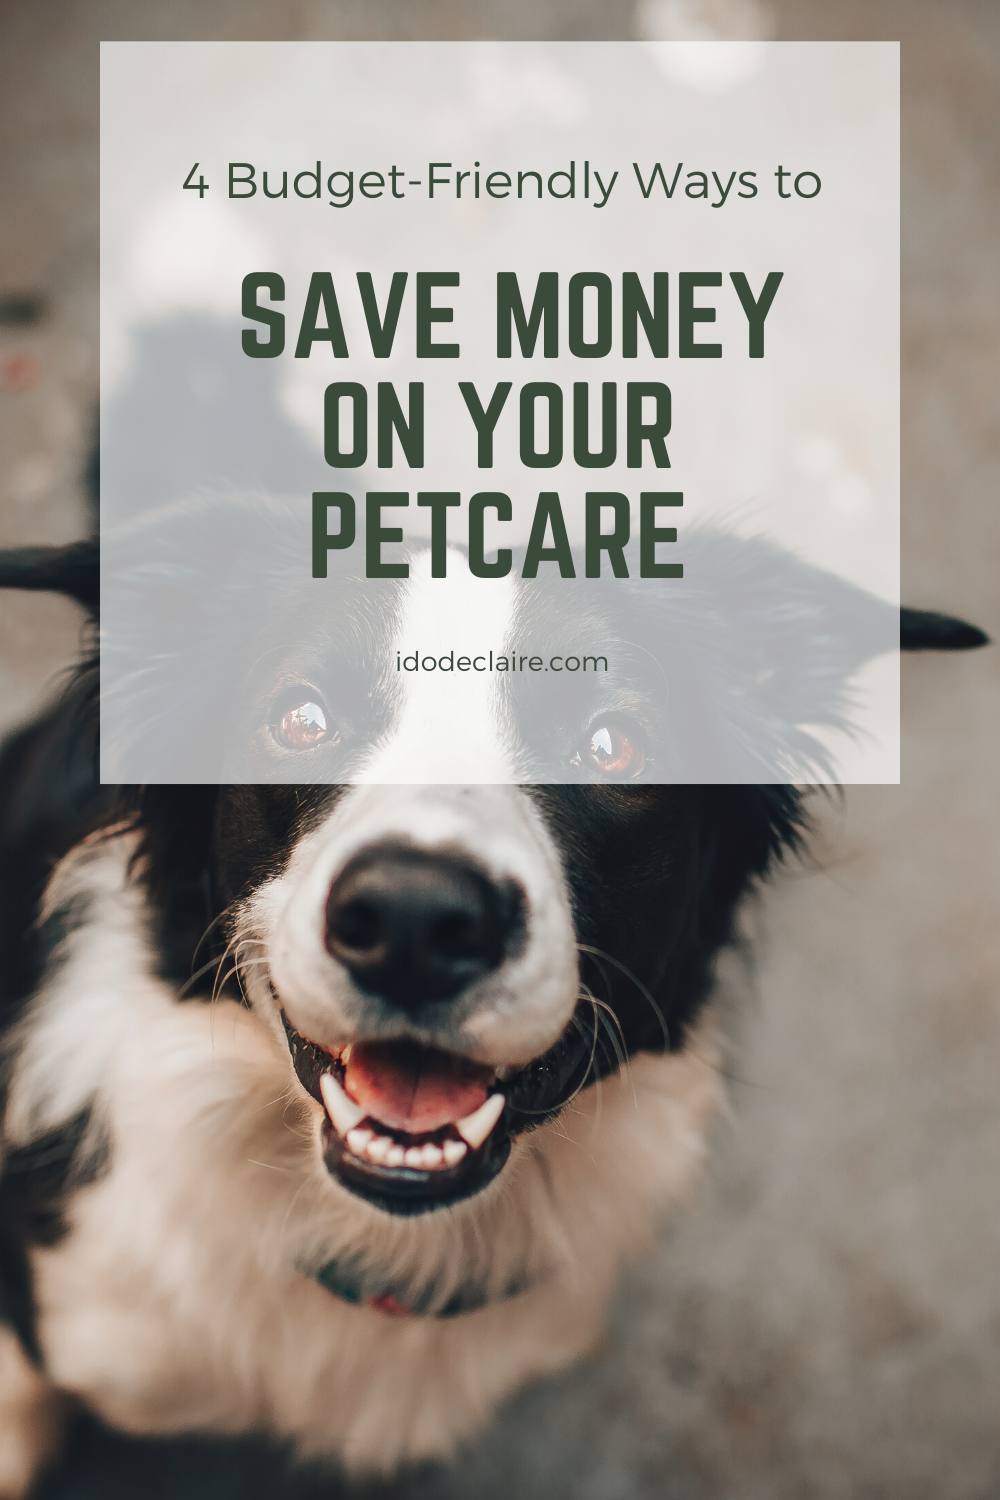 4 Budget-Friendly Ways to Save Money on Your Petcare